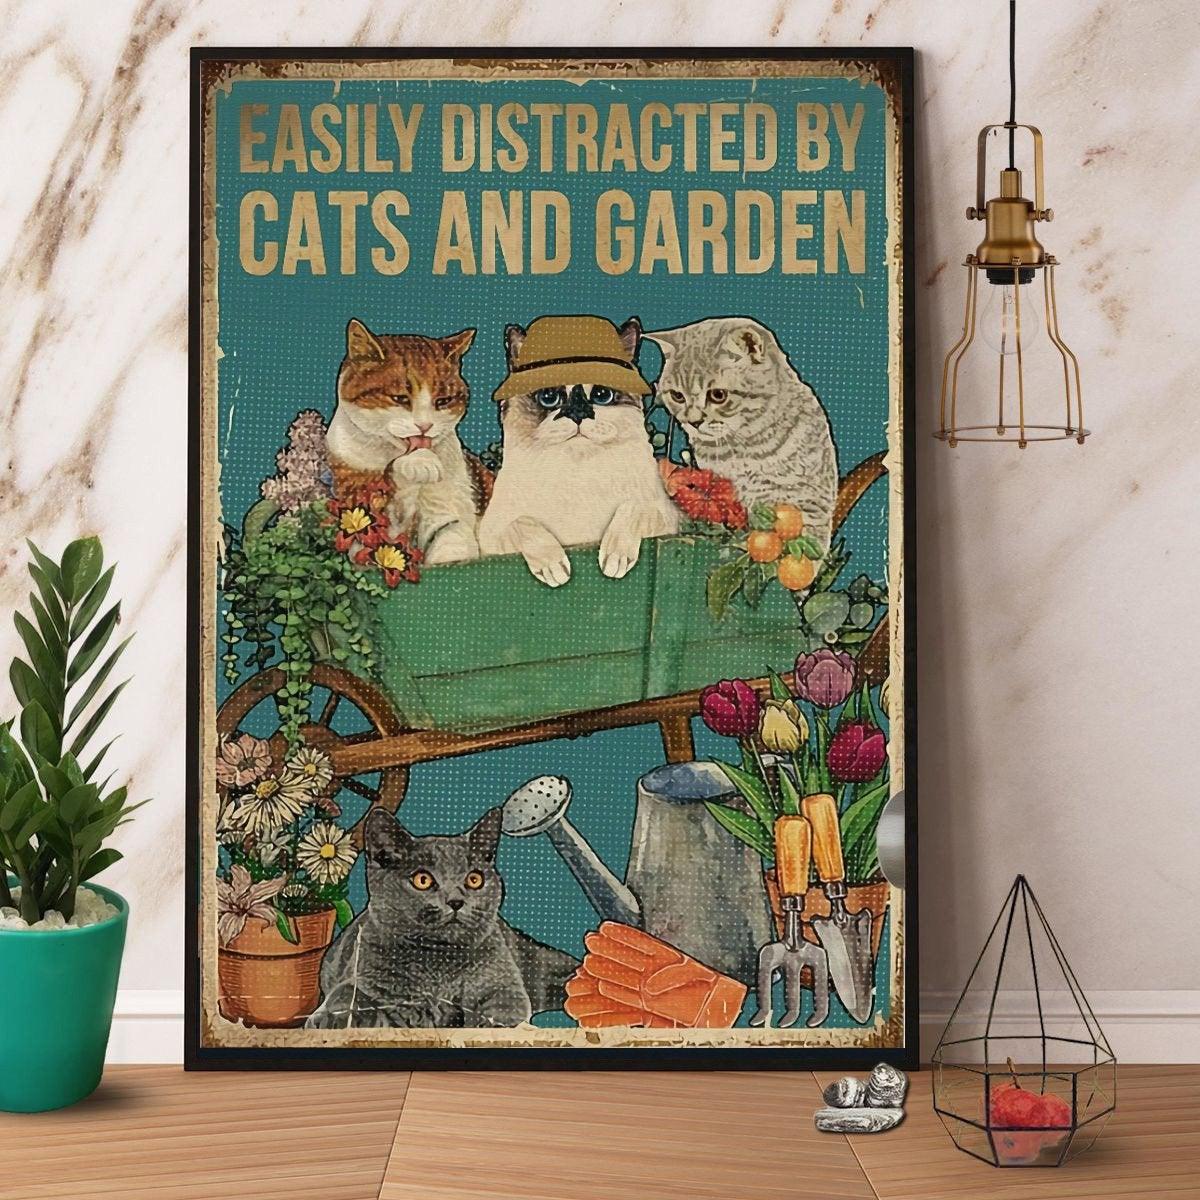 Cat Portrait Canvas - Cat Vintage Easily Distracted By Cats And Garden Canvas - Perfect Gift For Cat Lover, Friend, Family - Amzanimalsgift